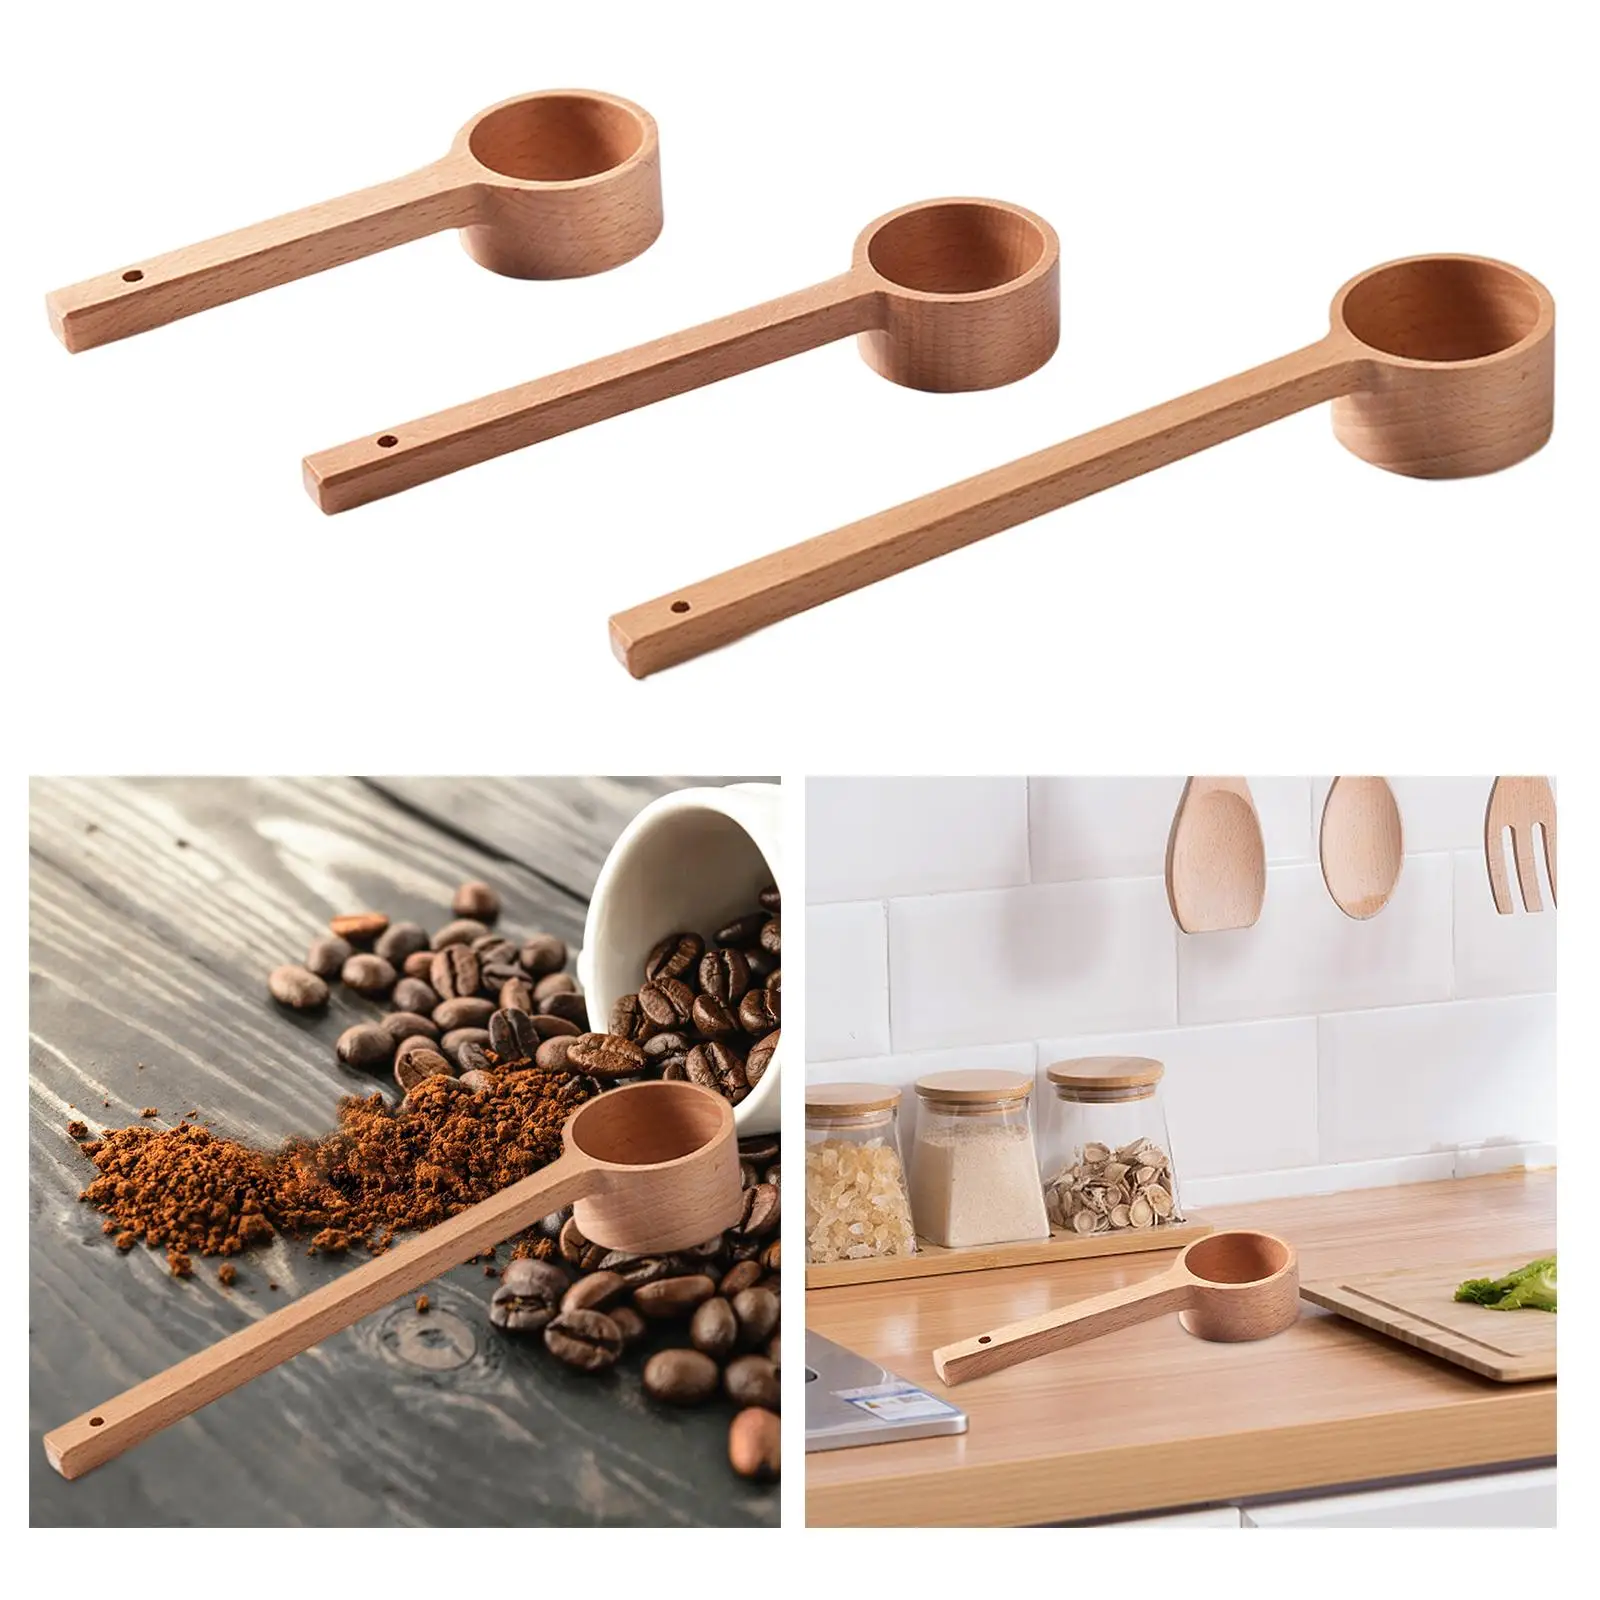 Wooden Measure Spoon Tablespoon Portable Baking Utensil Durable Attachments Coffee Spoon Measuring for Home Cafe Bean